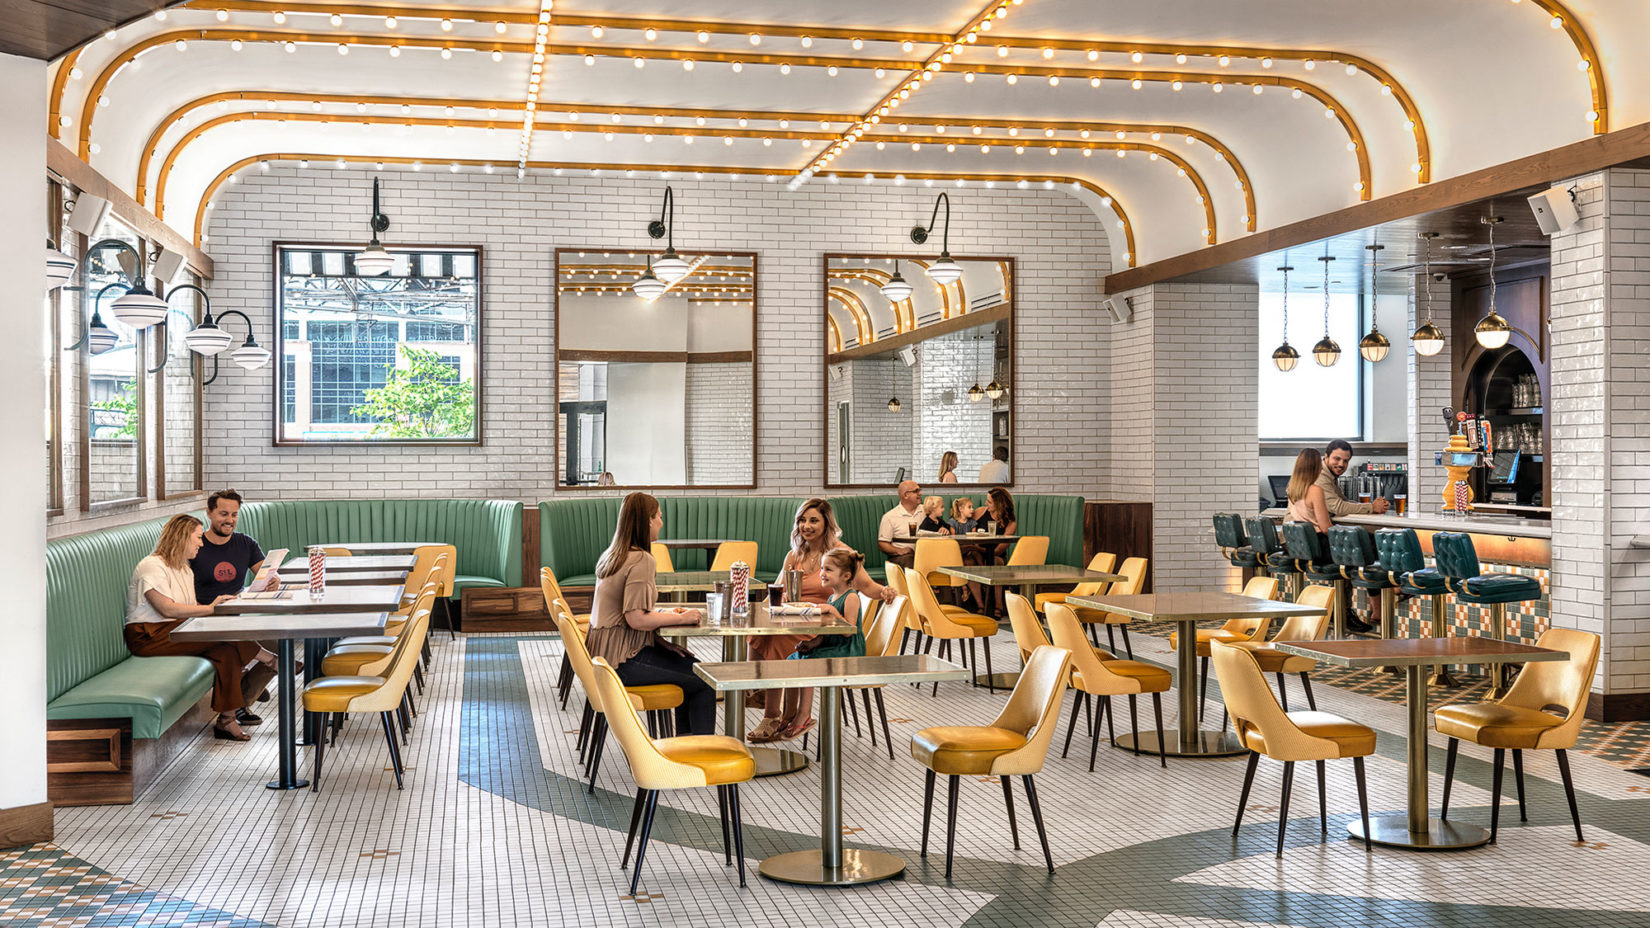 Soda Fountain at Union Station | Lawrence Group